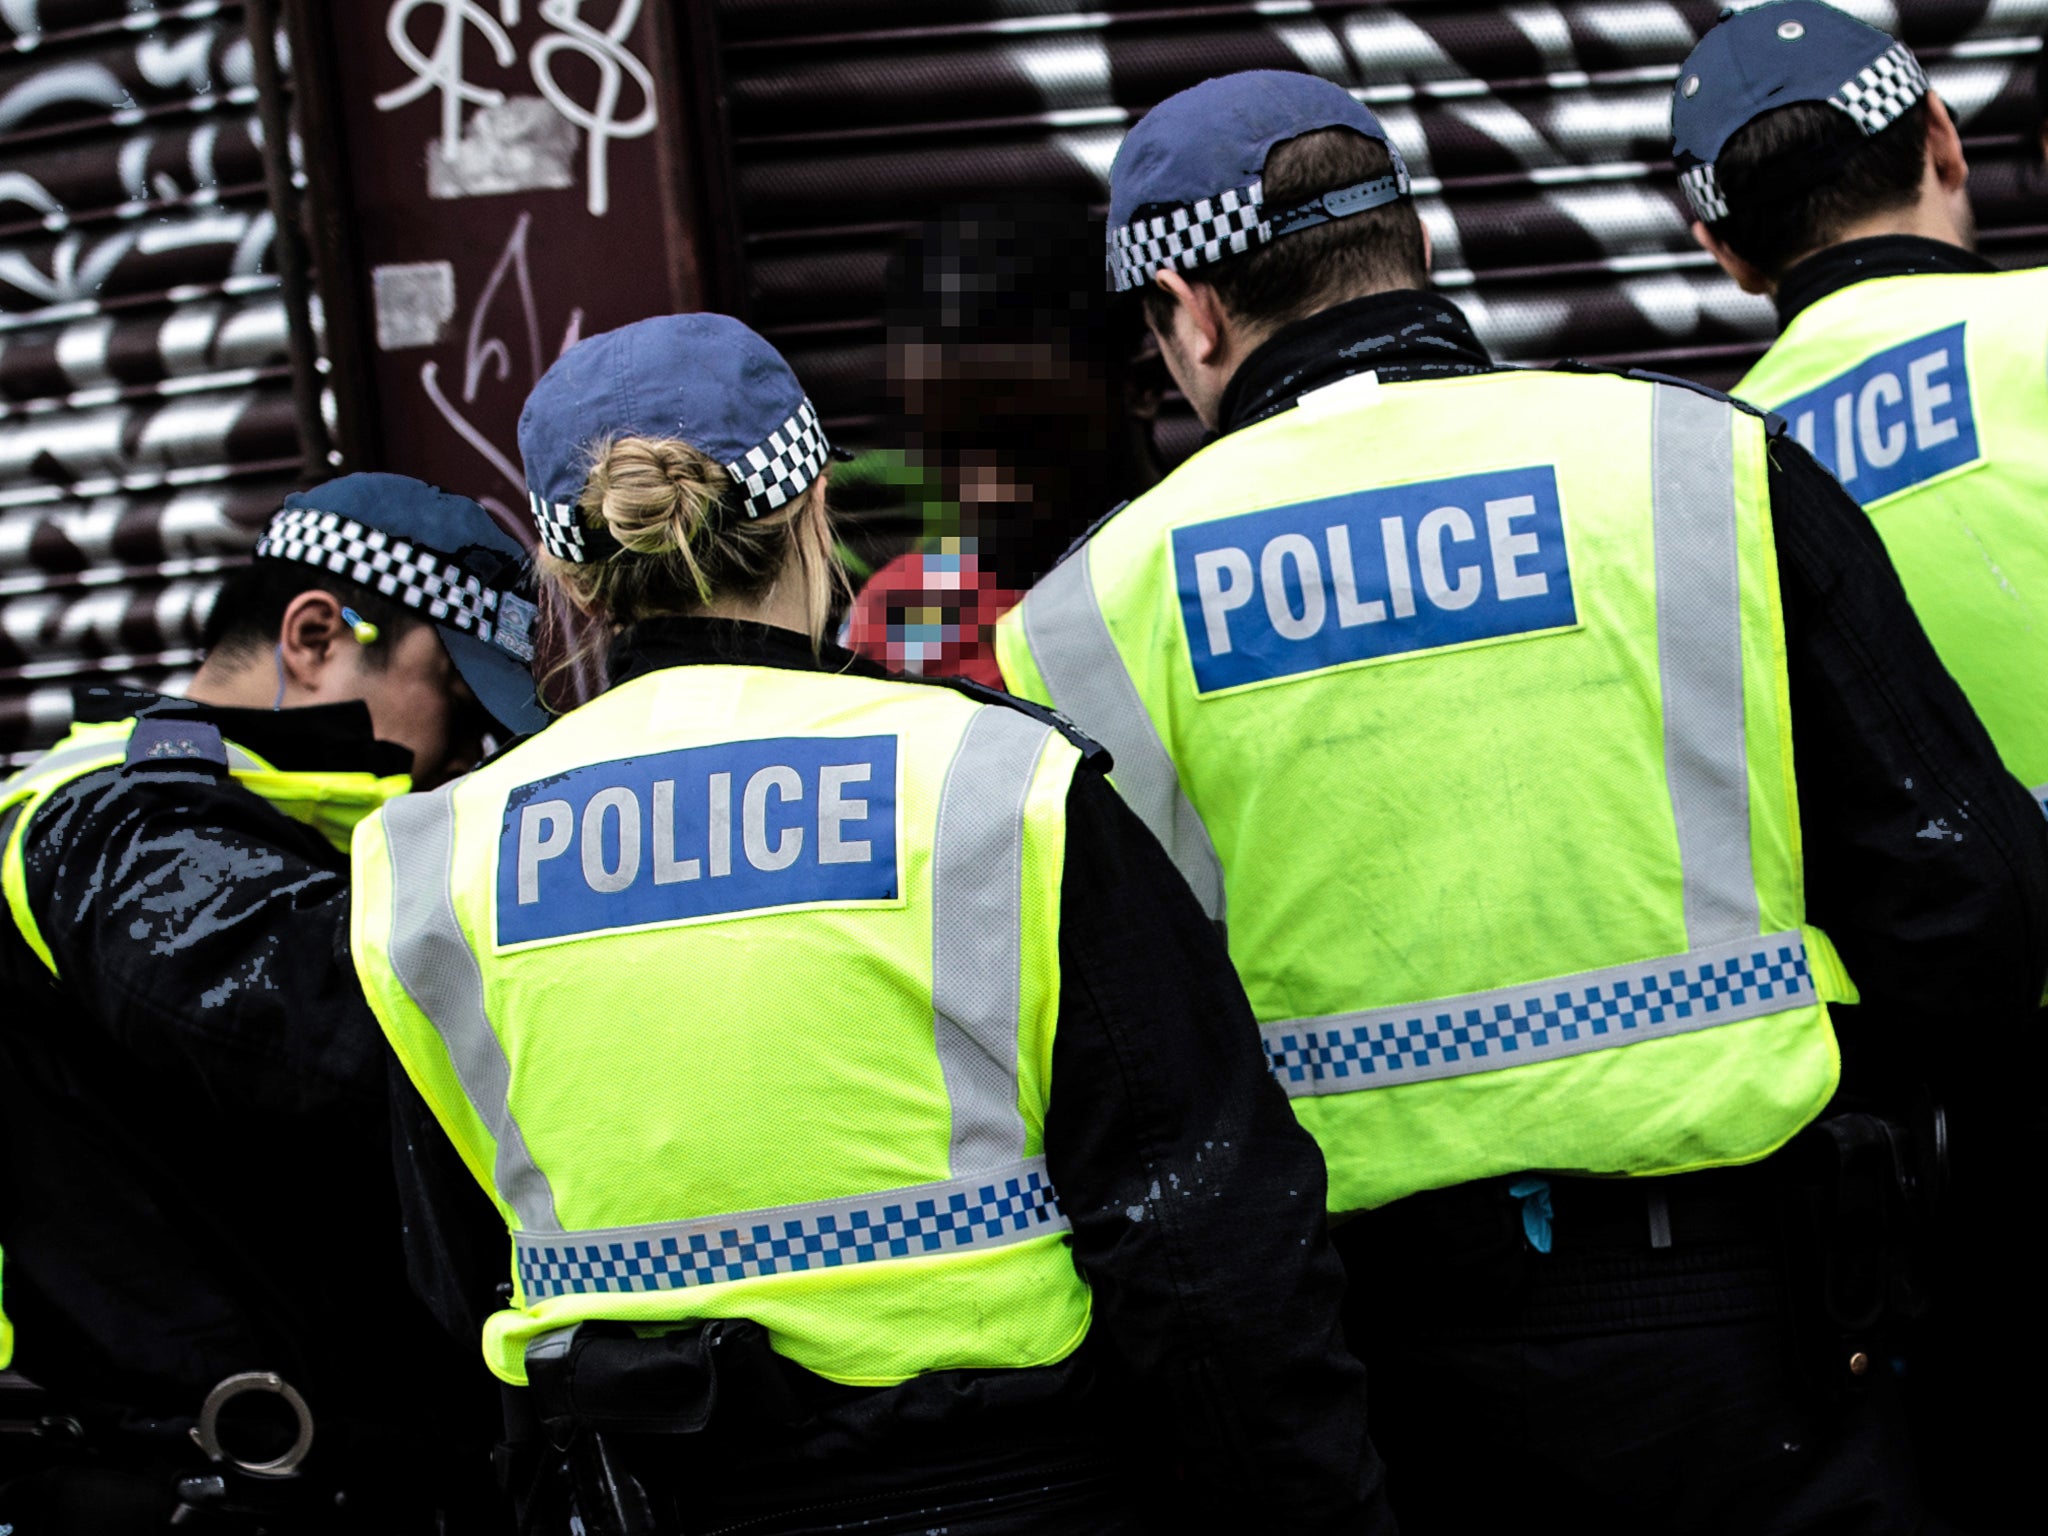 The pilot aims to increase the effectiveness of stop and search and improve public trust